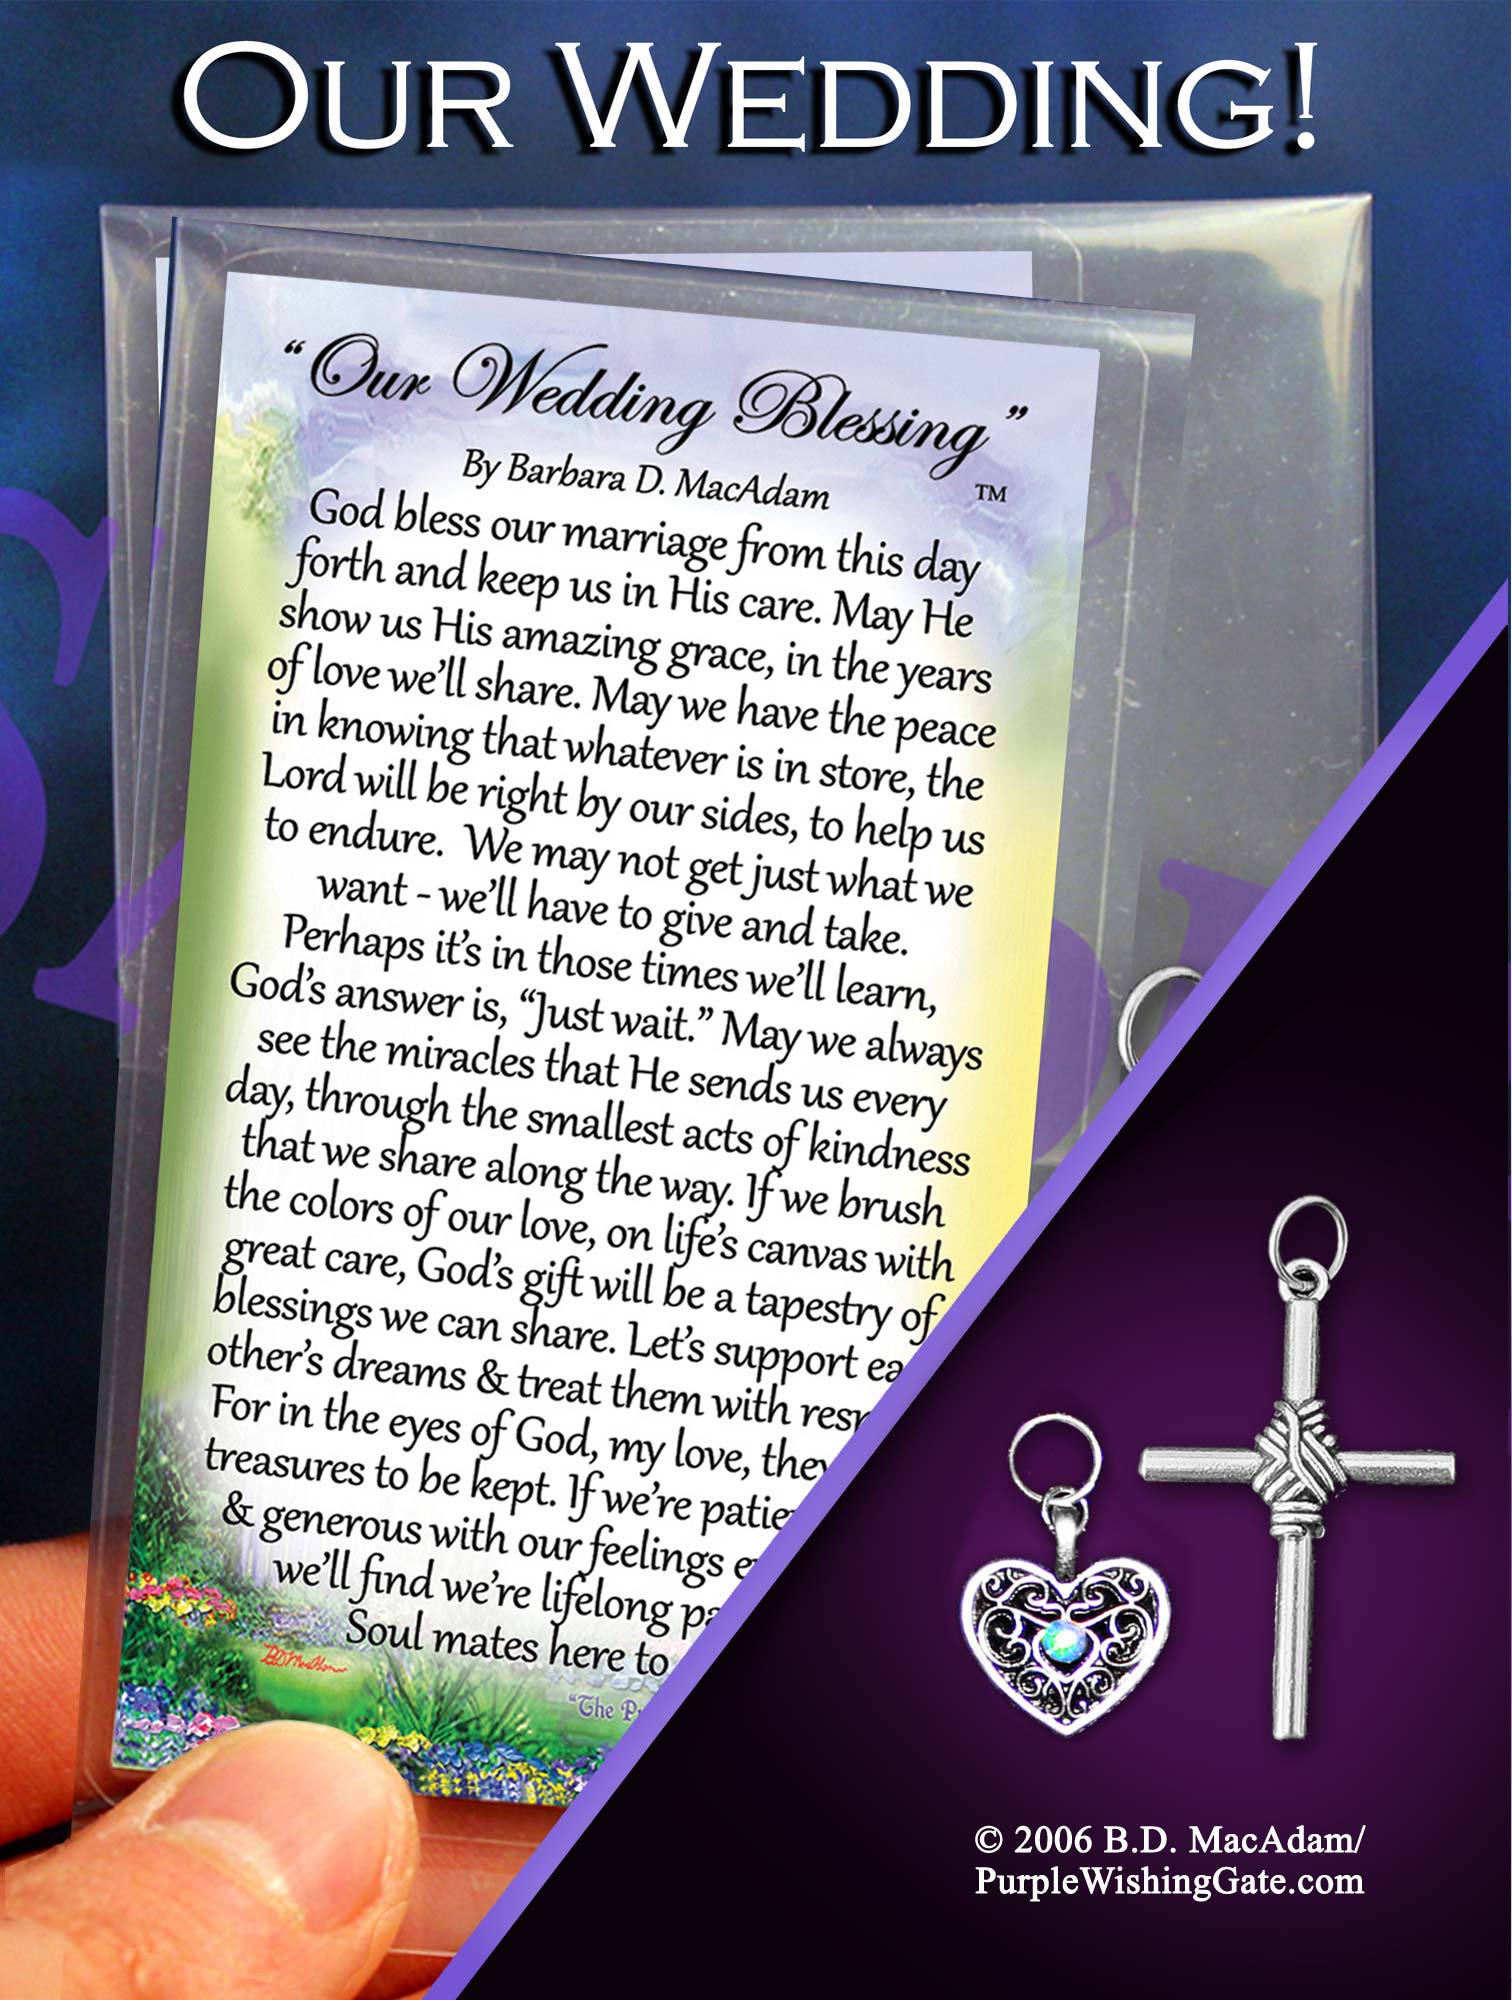 Our Wedding Blessing - Pocket Blessing | PurpleWishingGate.com